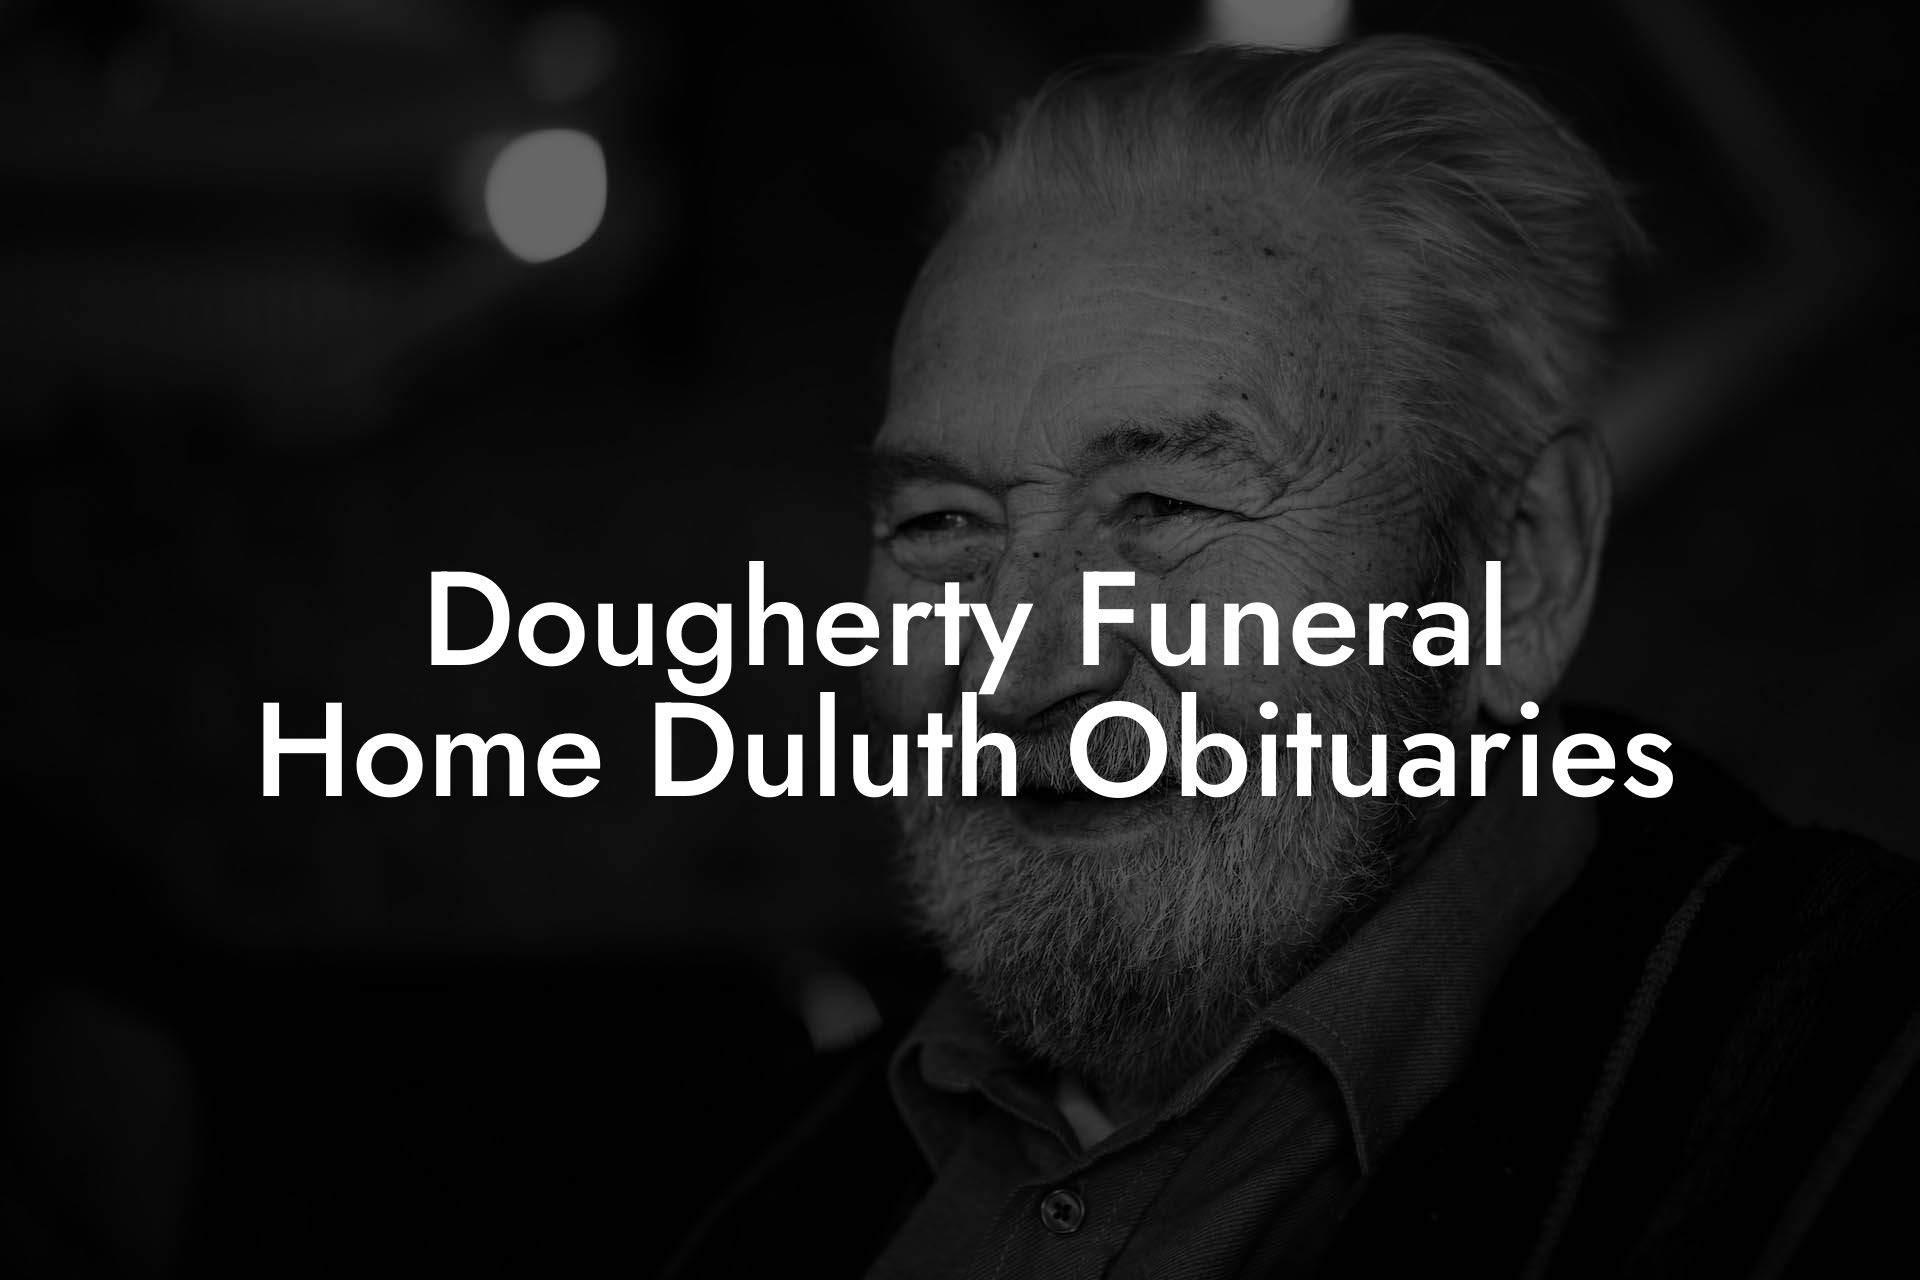 Dougherty Funeral Home Duluth Obituaries